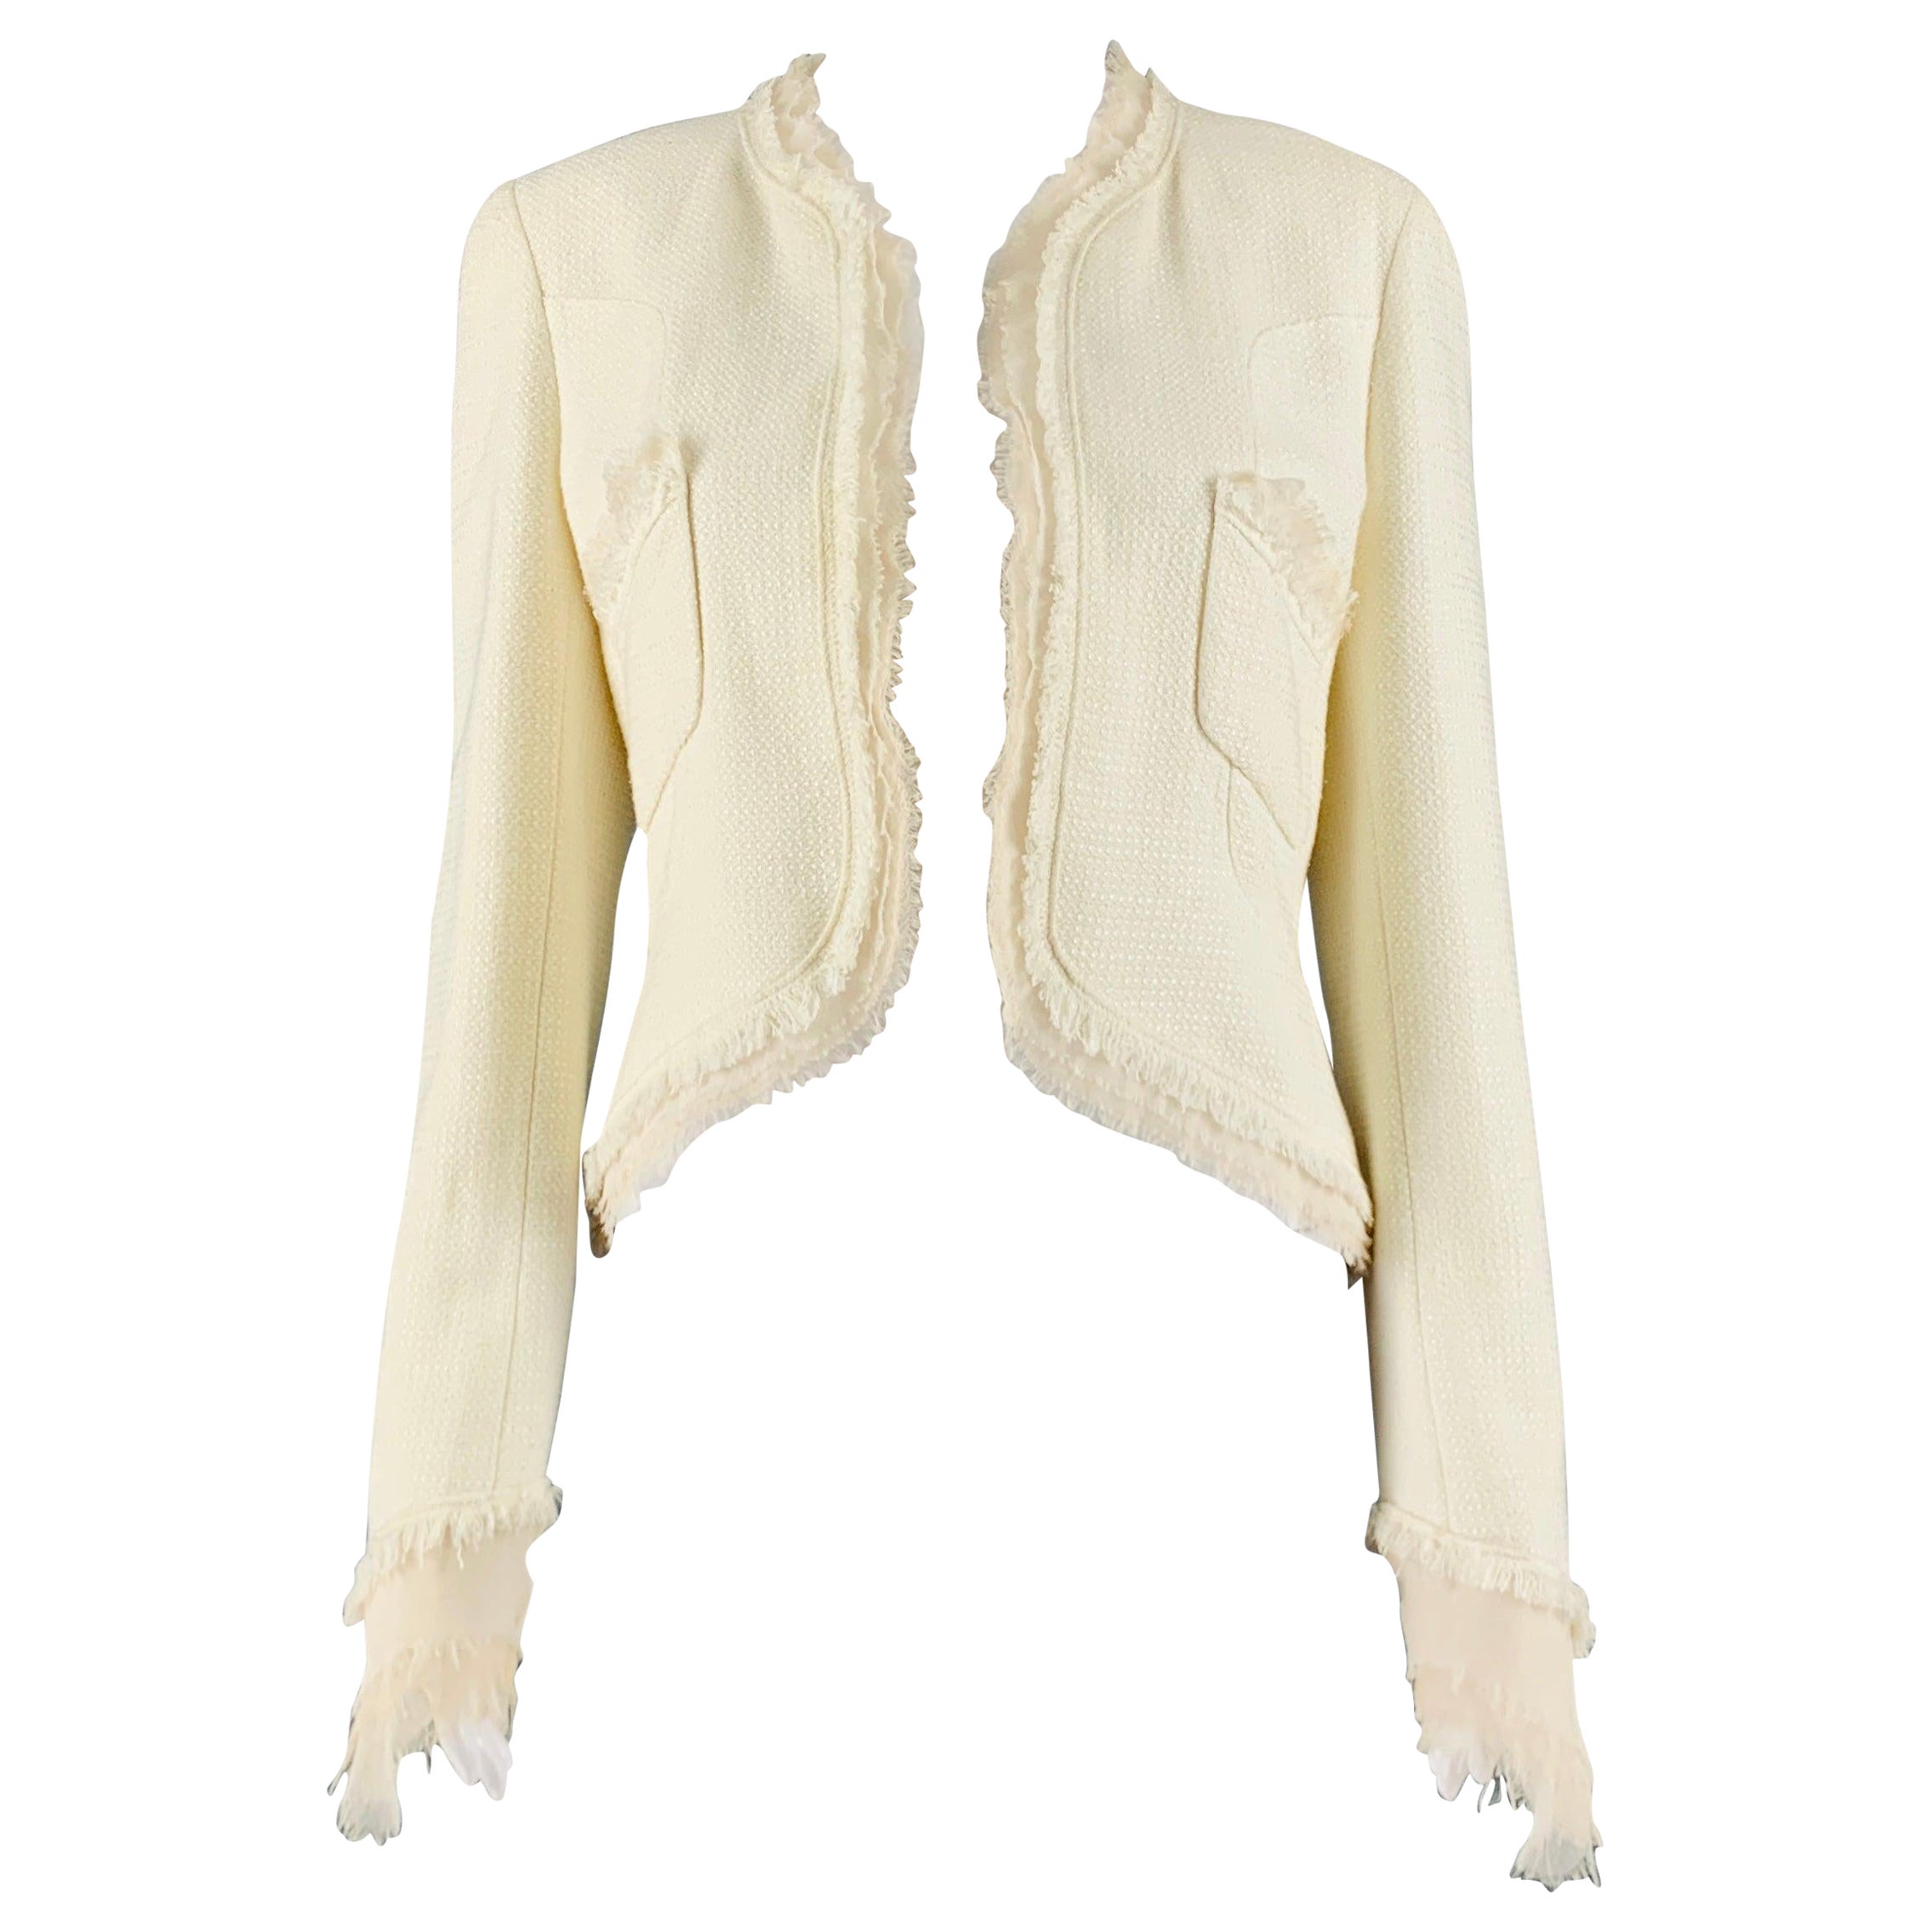 CHANEL Size 8 Cream Cotton Acrylic Textured Jacket For Sale